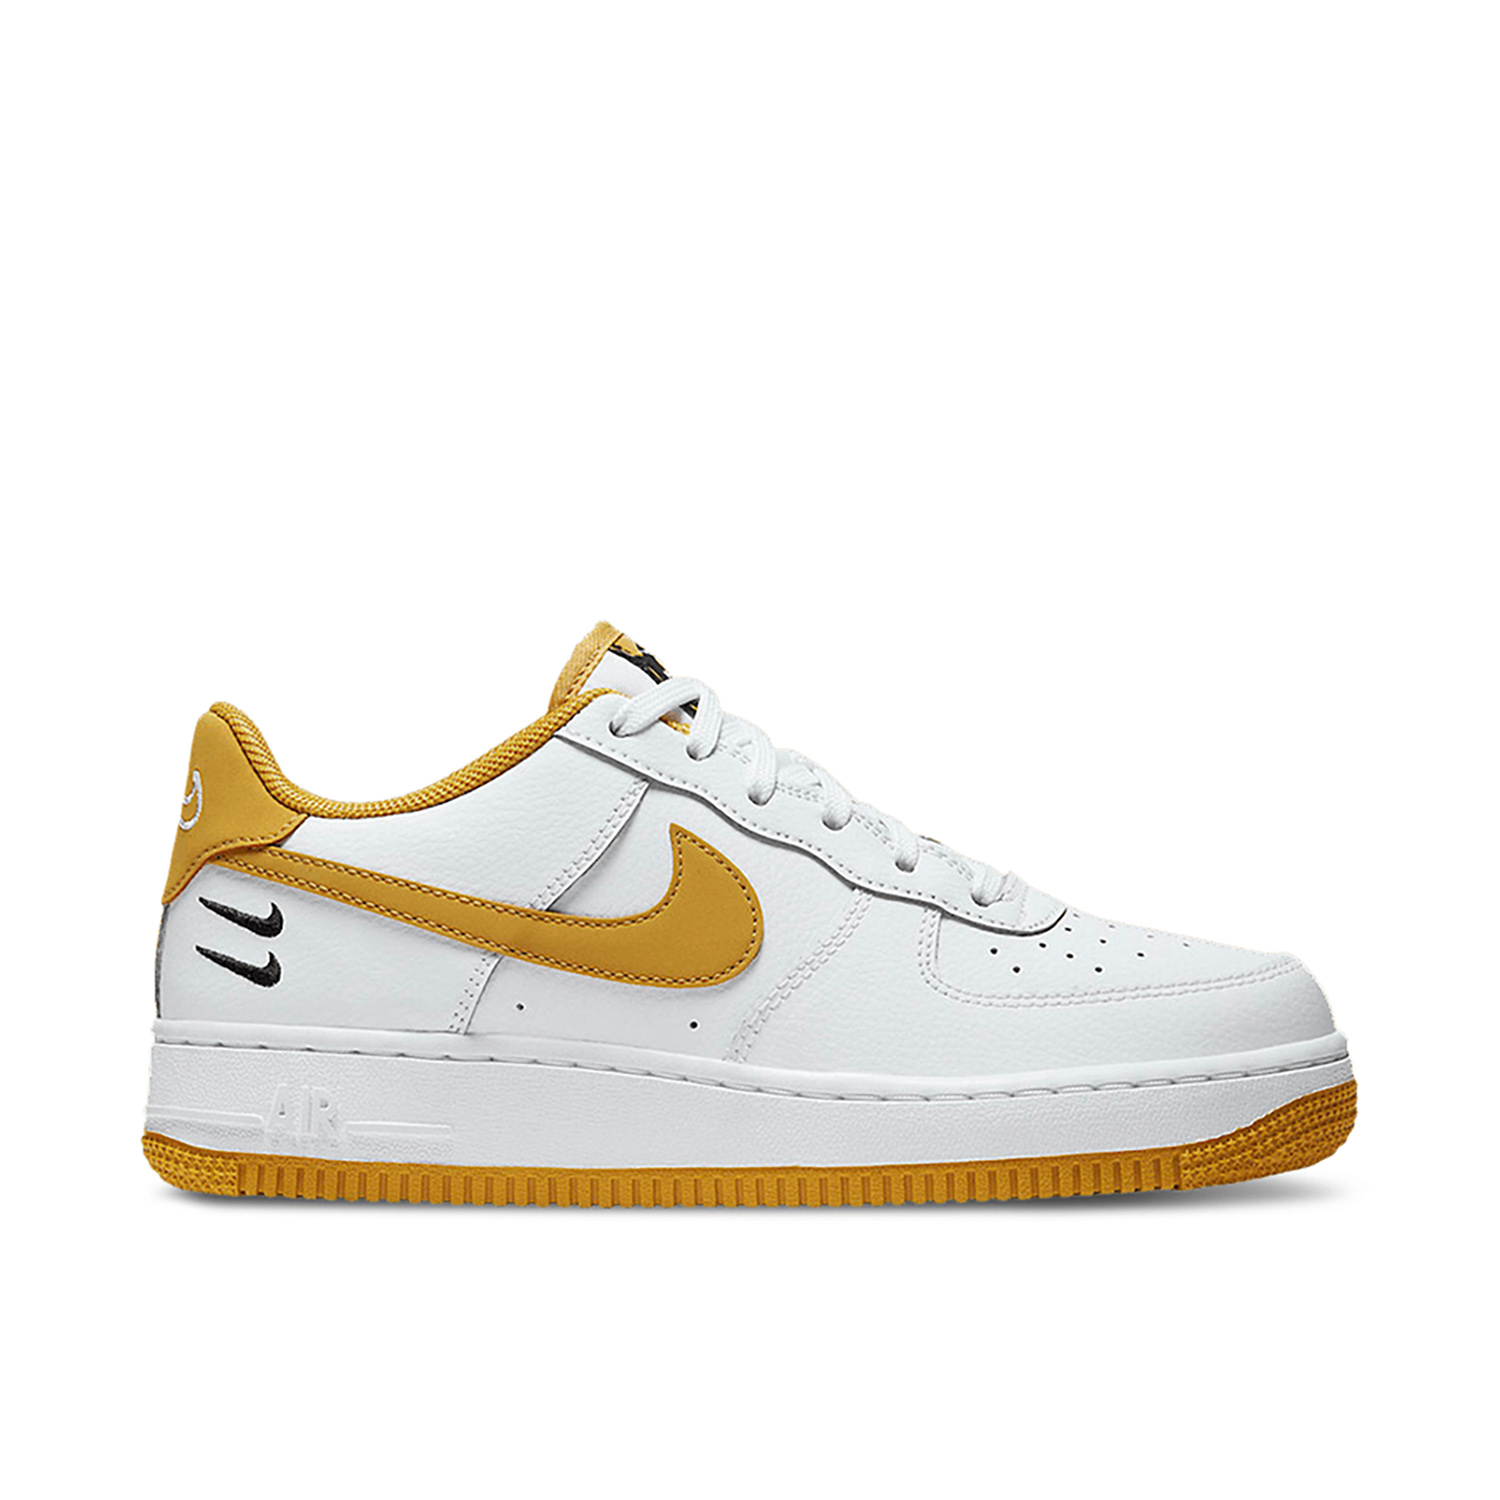 Nike Air Force 1 Low Dual Swoosh White Wheat | DH2947-100 | Laced